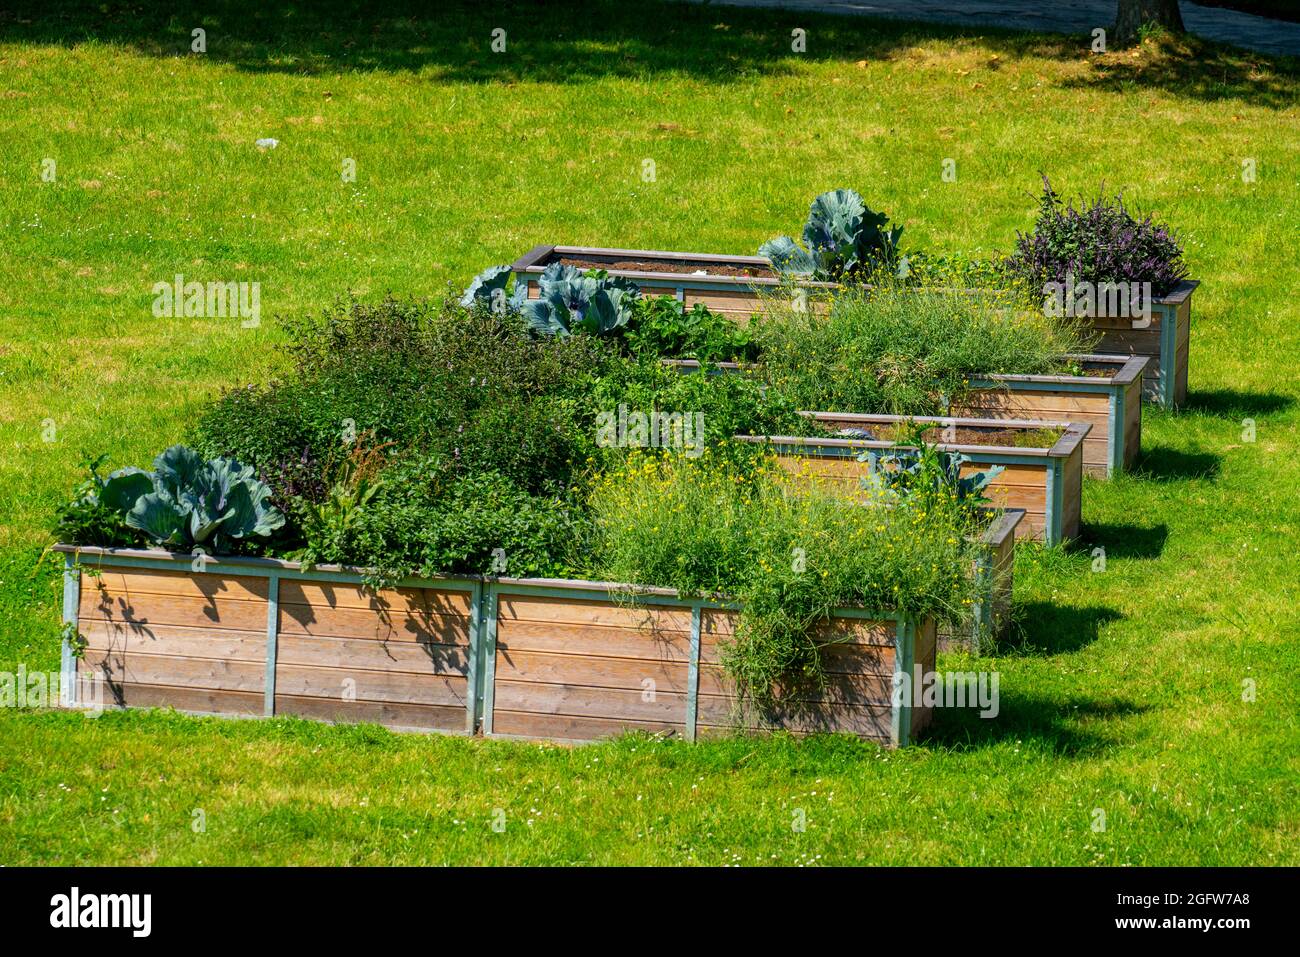 Raised beds, with different ornamental and useful plants, Stock Photo